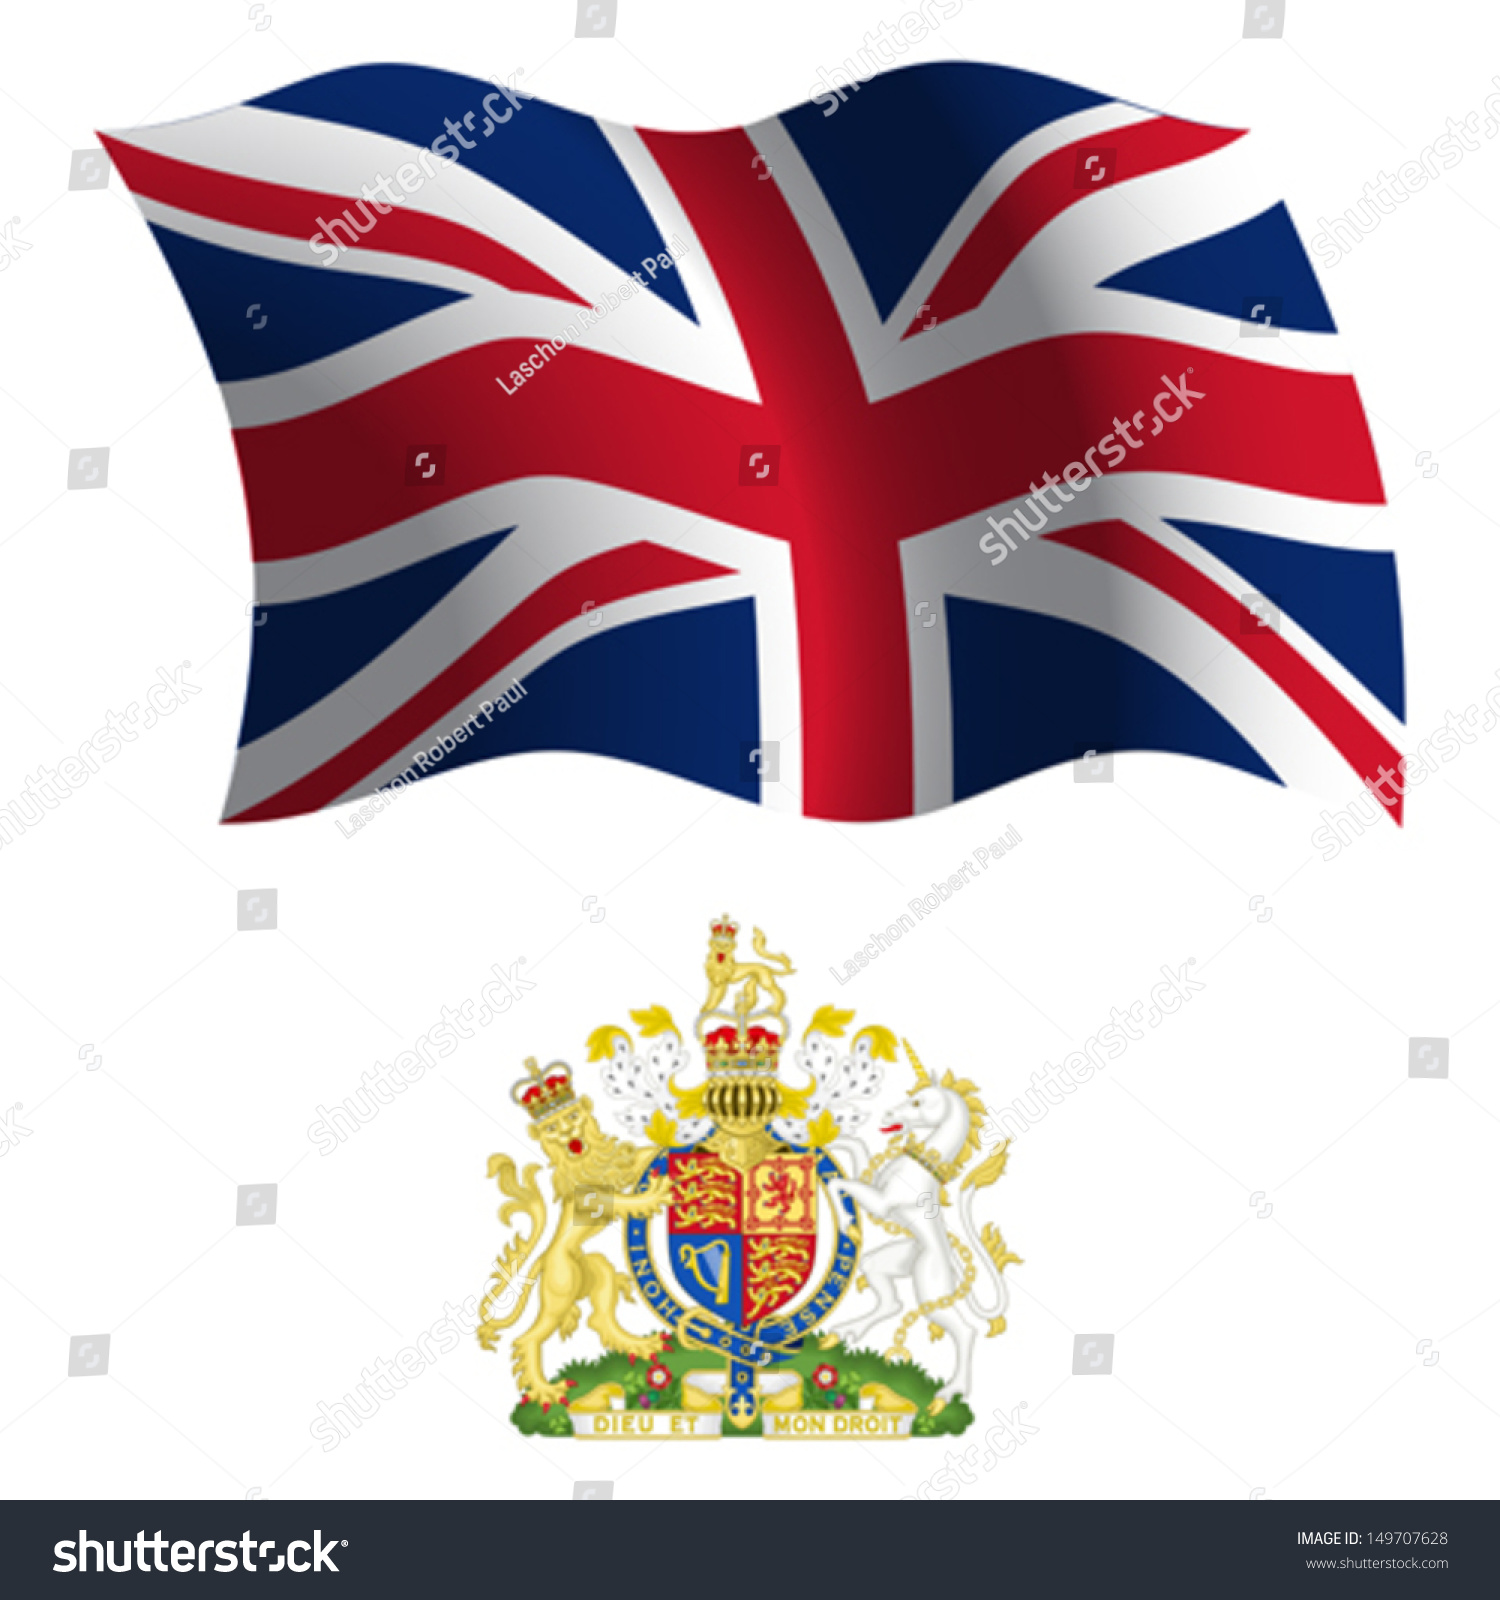 United Kingdom Wavy Flag And Coat Of Arms Against White Background ...